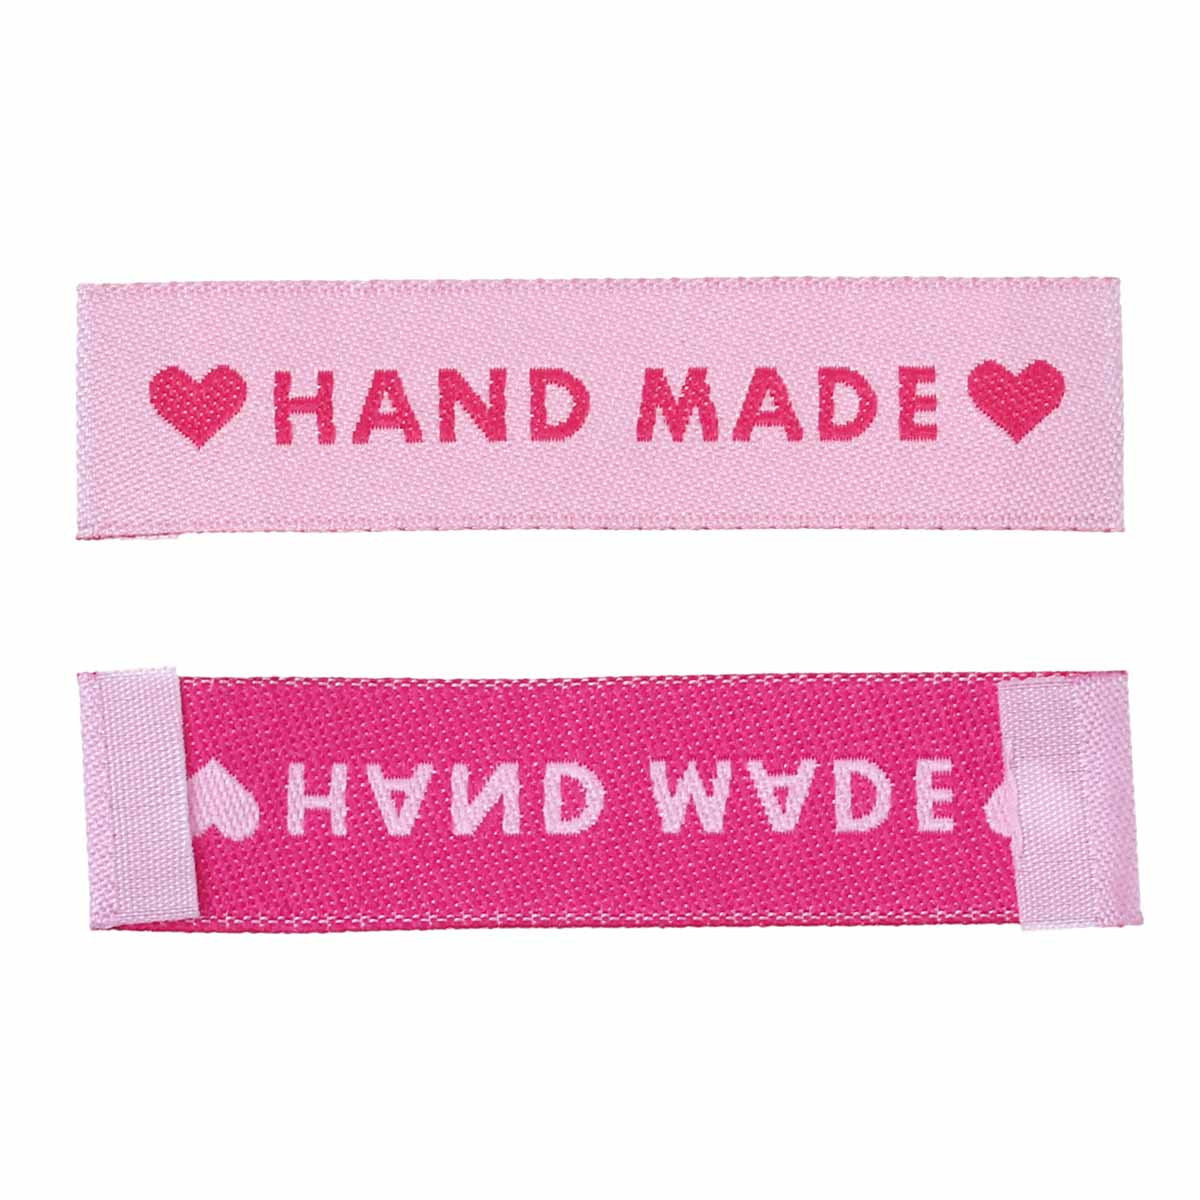 10 Woven printed sewing labels - handmade with love - different styles for choice: pink, black or white